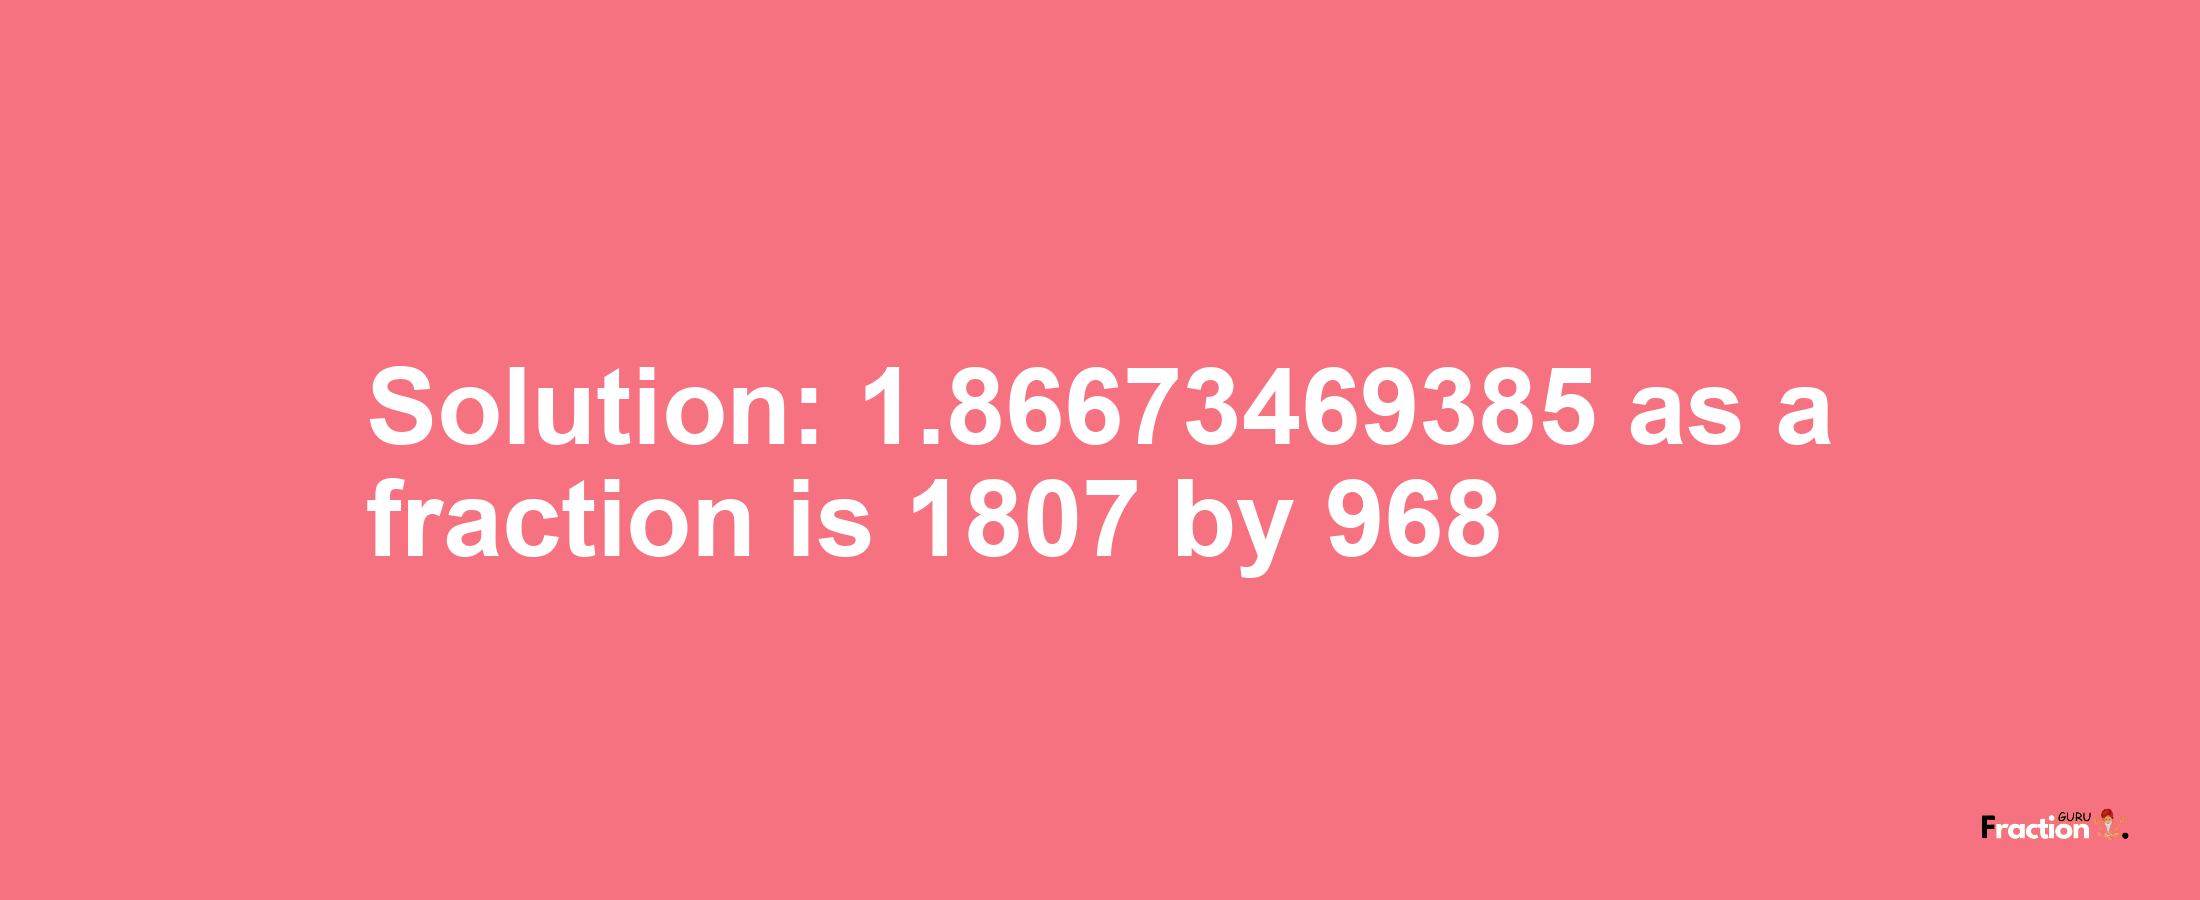 Solution:1.86673469385 as a fraction is 1807/968